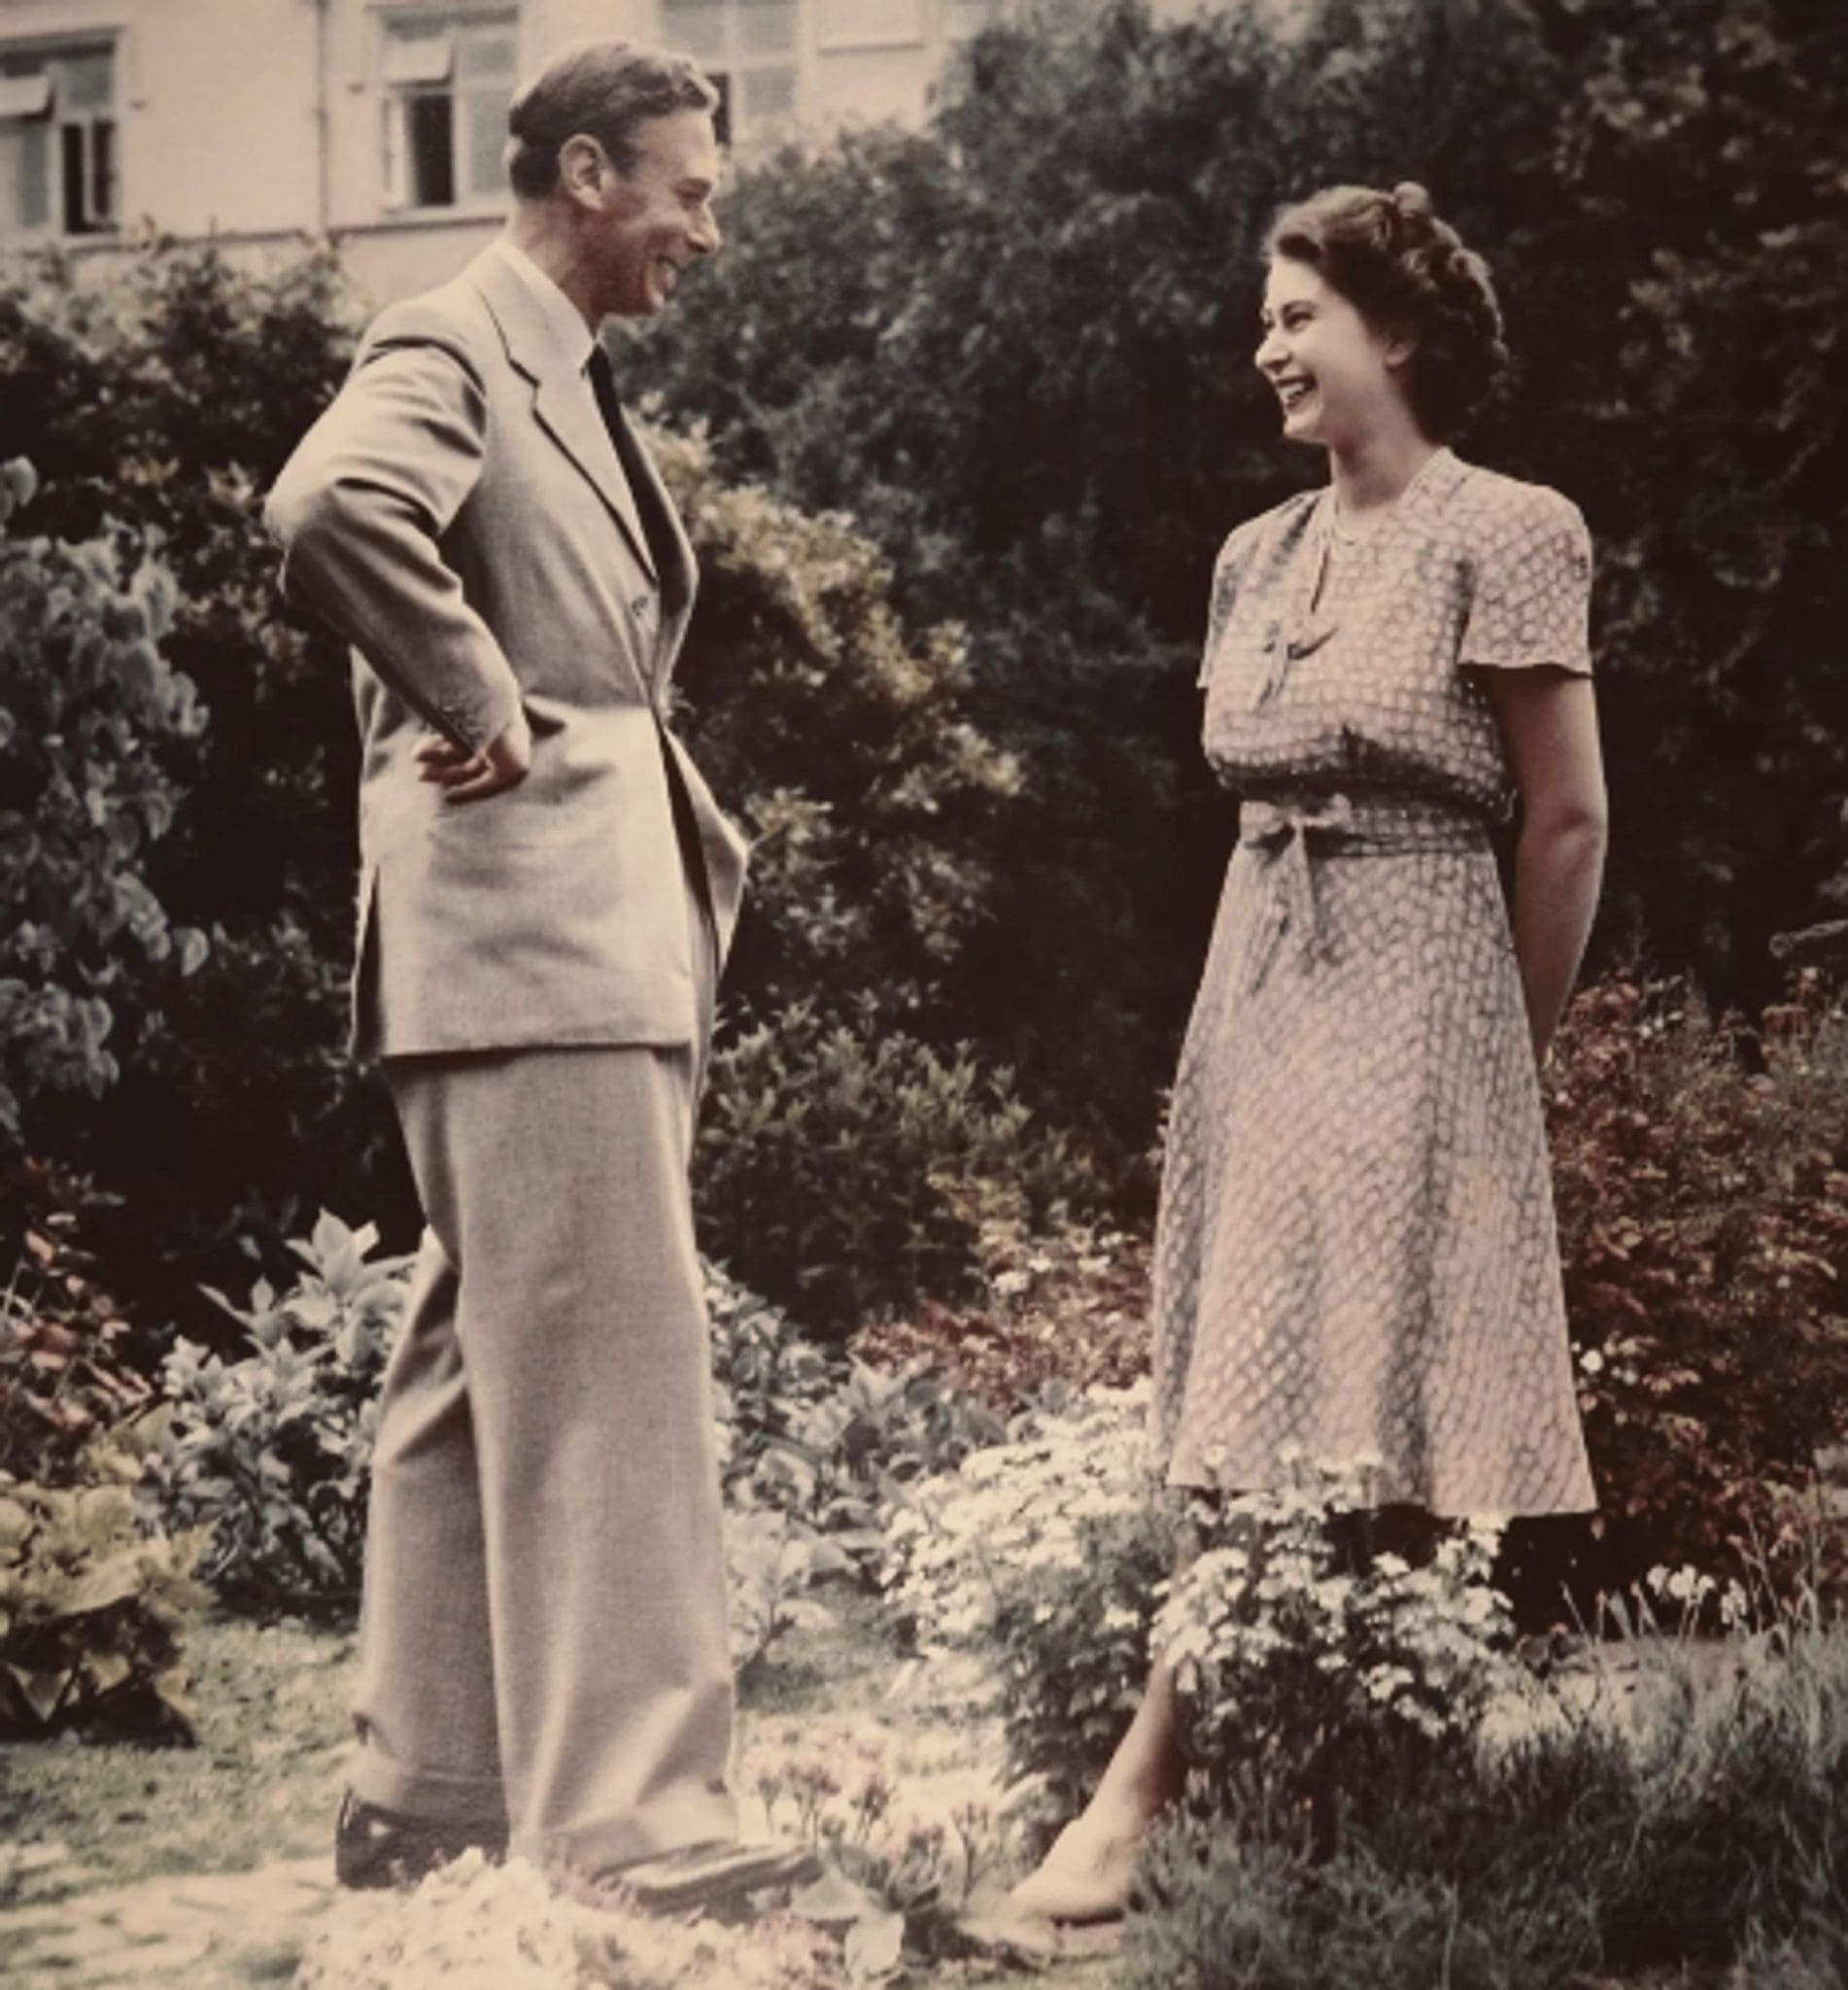 Elizabeth II shared a touching photo with King George VI on Father's Day